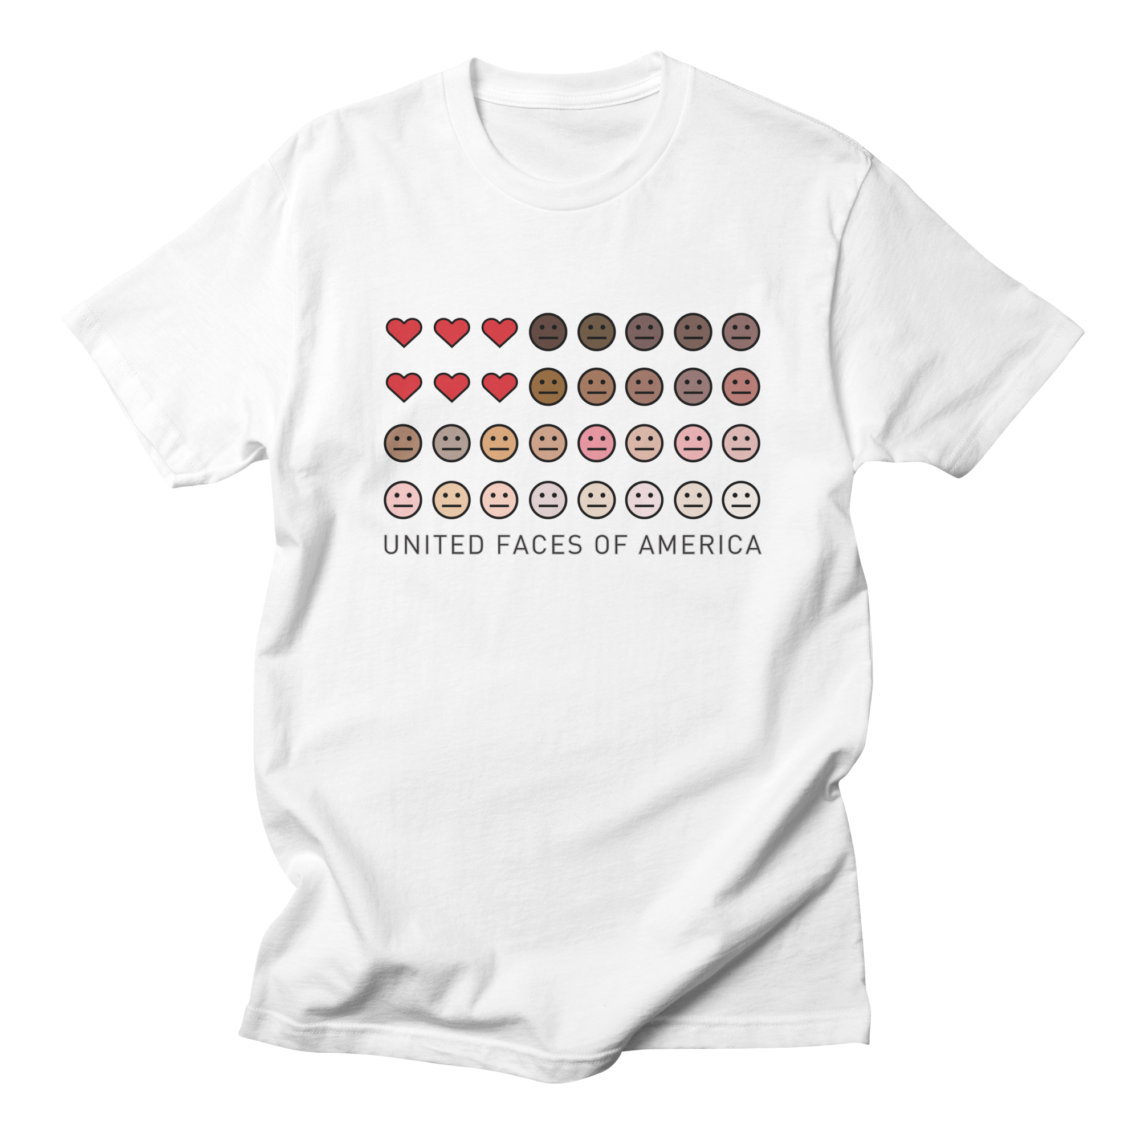 United Faces of America© t-shirt